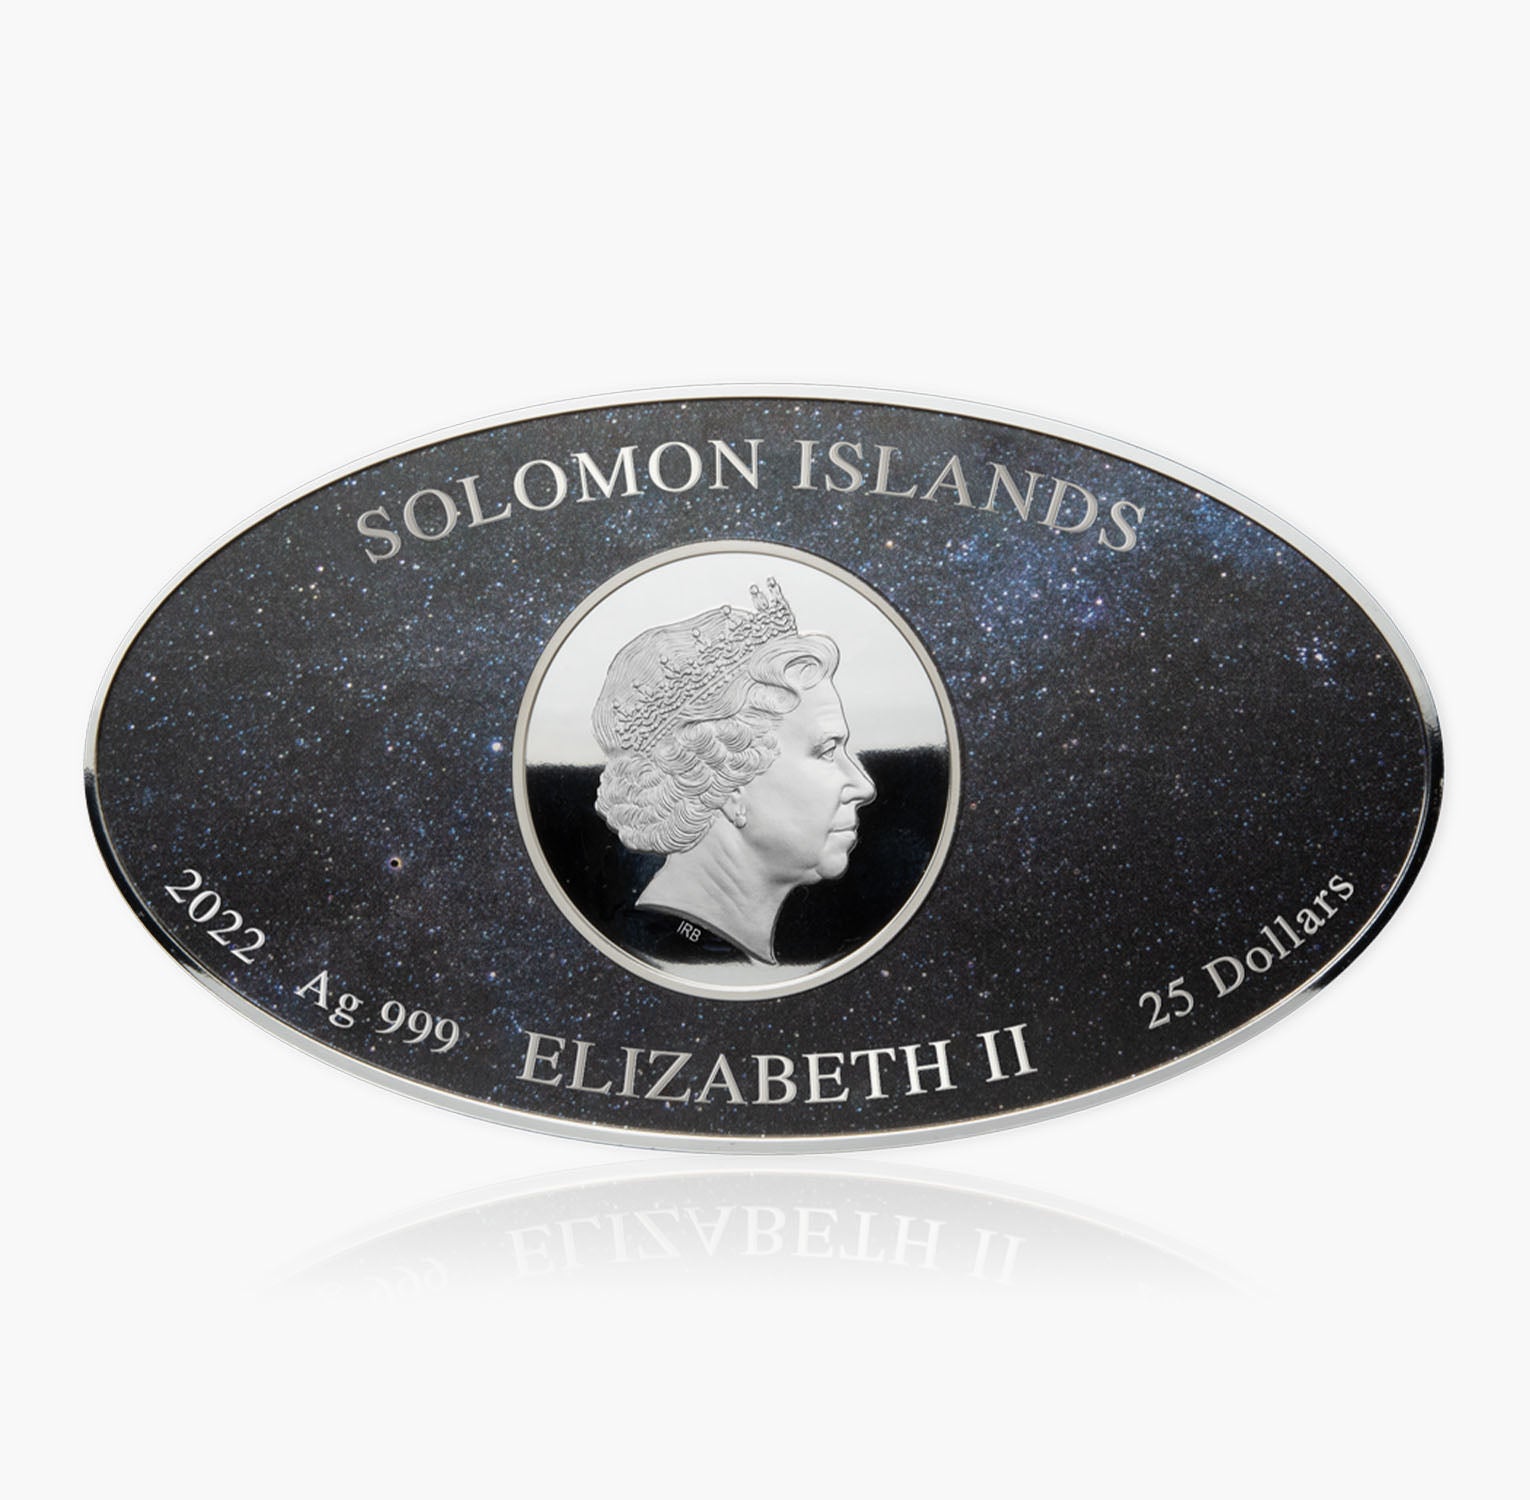 Planets of the Solar System 1Kg Silver Coin